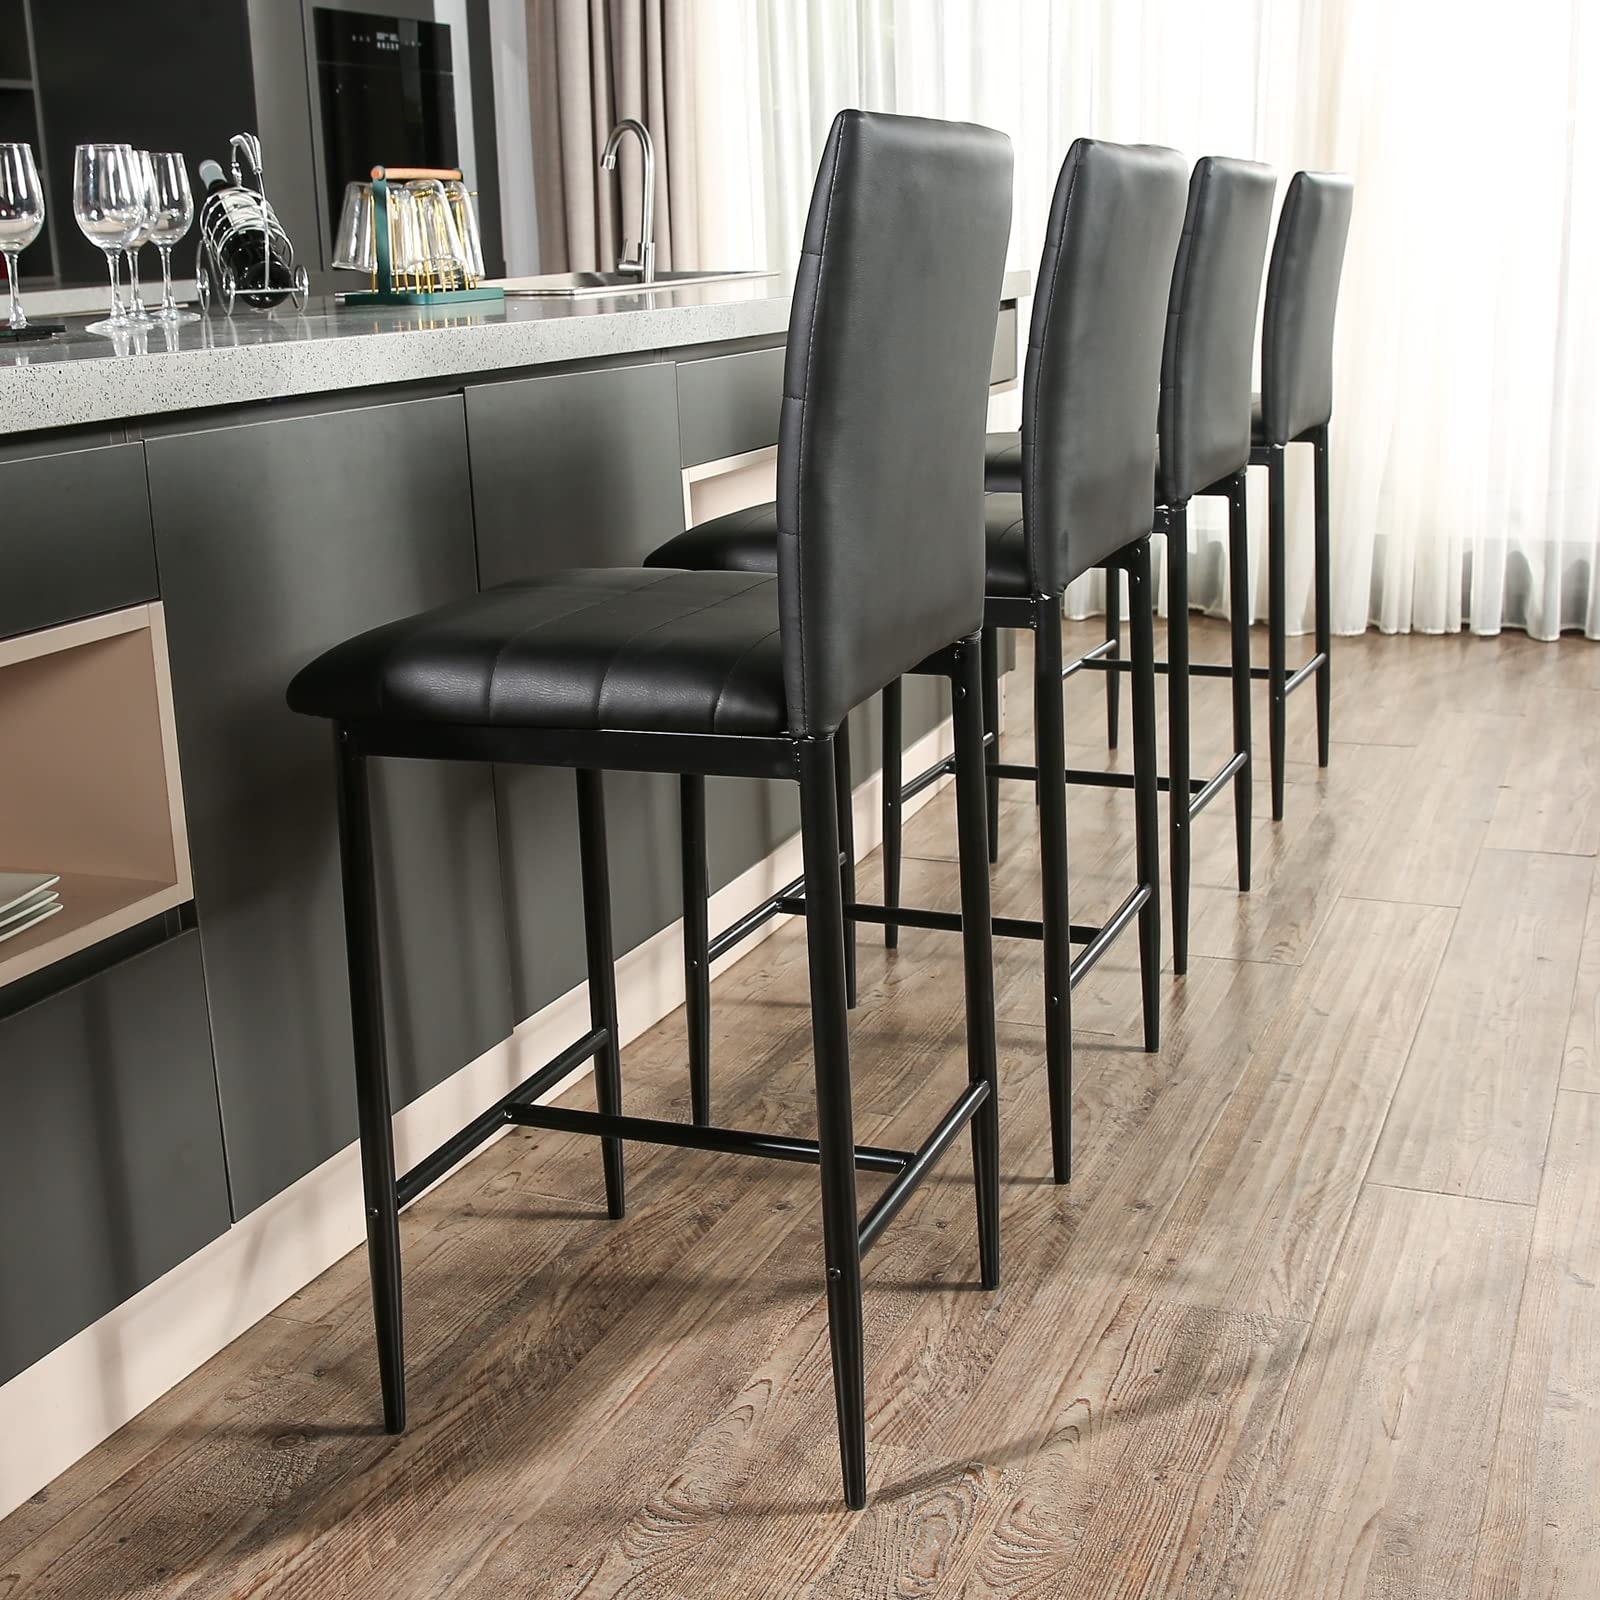 SICOTAS Counter Height Stools Set of 4 - Modern PU Leather Bar